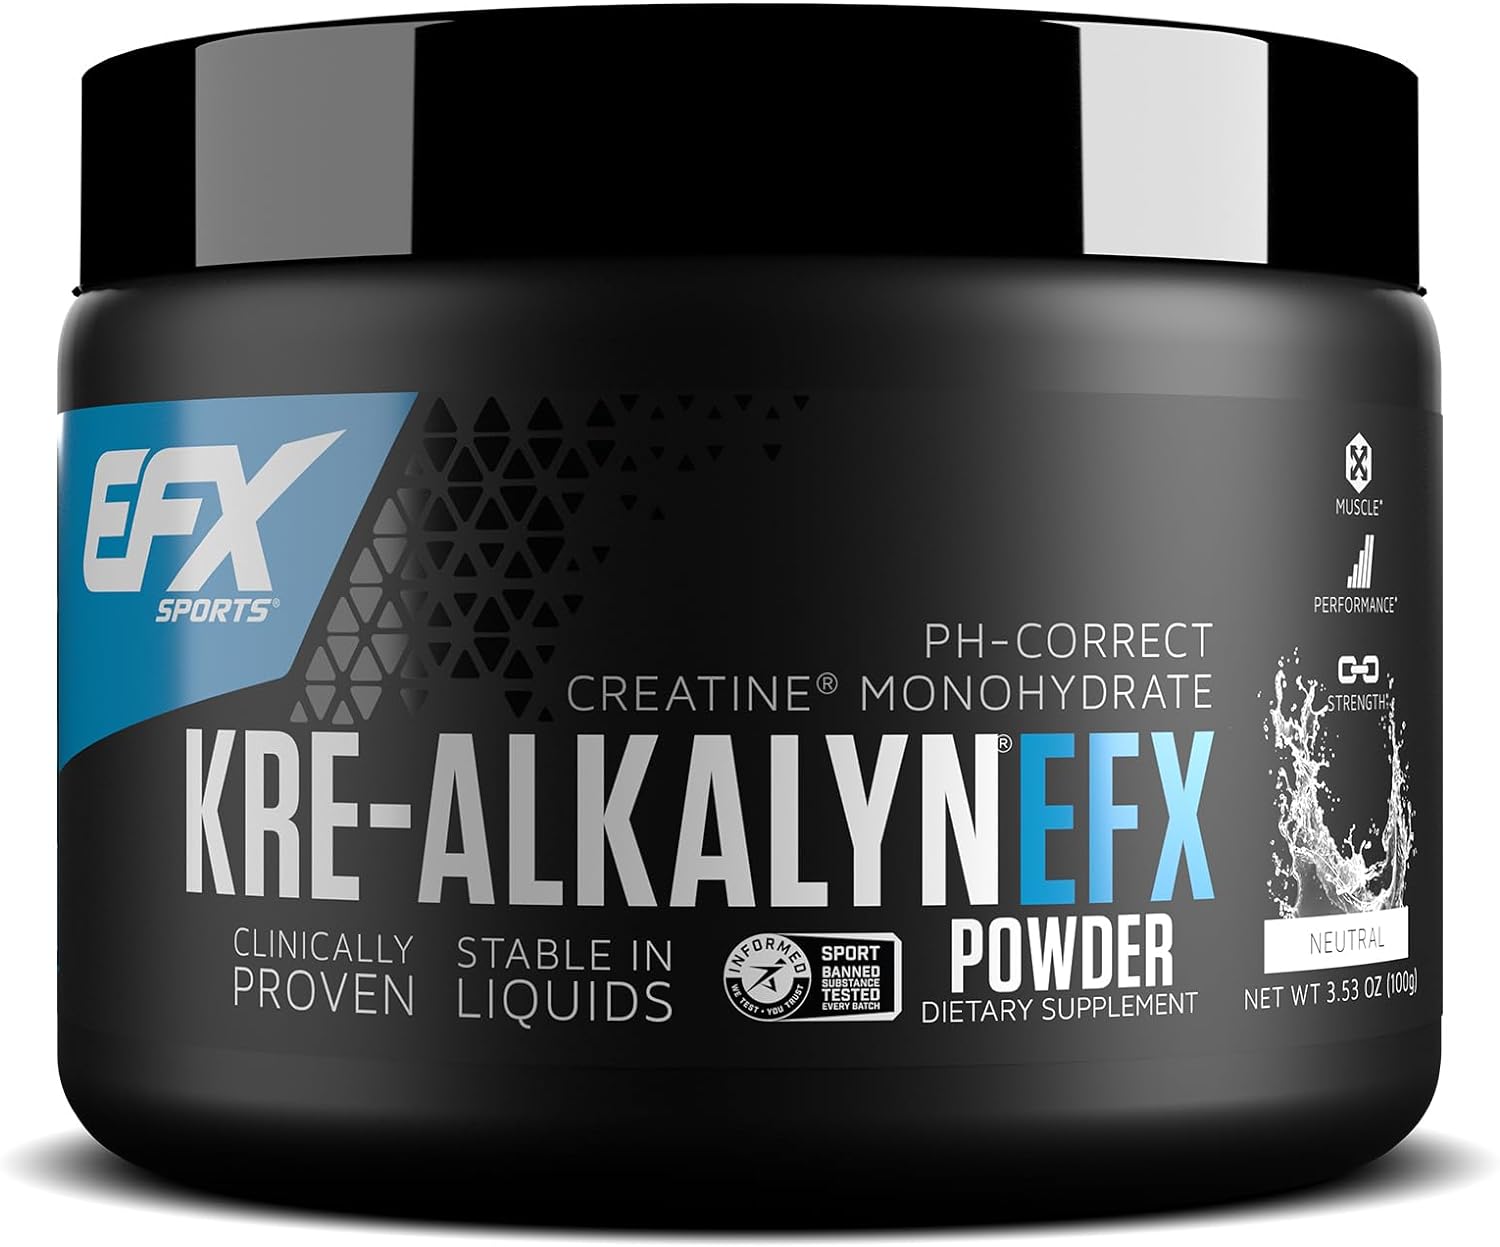 EFX Sports Kre Alkalyn EFX Powder pH Correct Creatine Monohydrate Powder Supplement Strength Muscle Growth Performance 66 Servings Unflavored